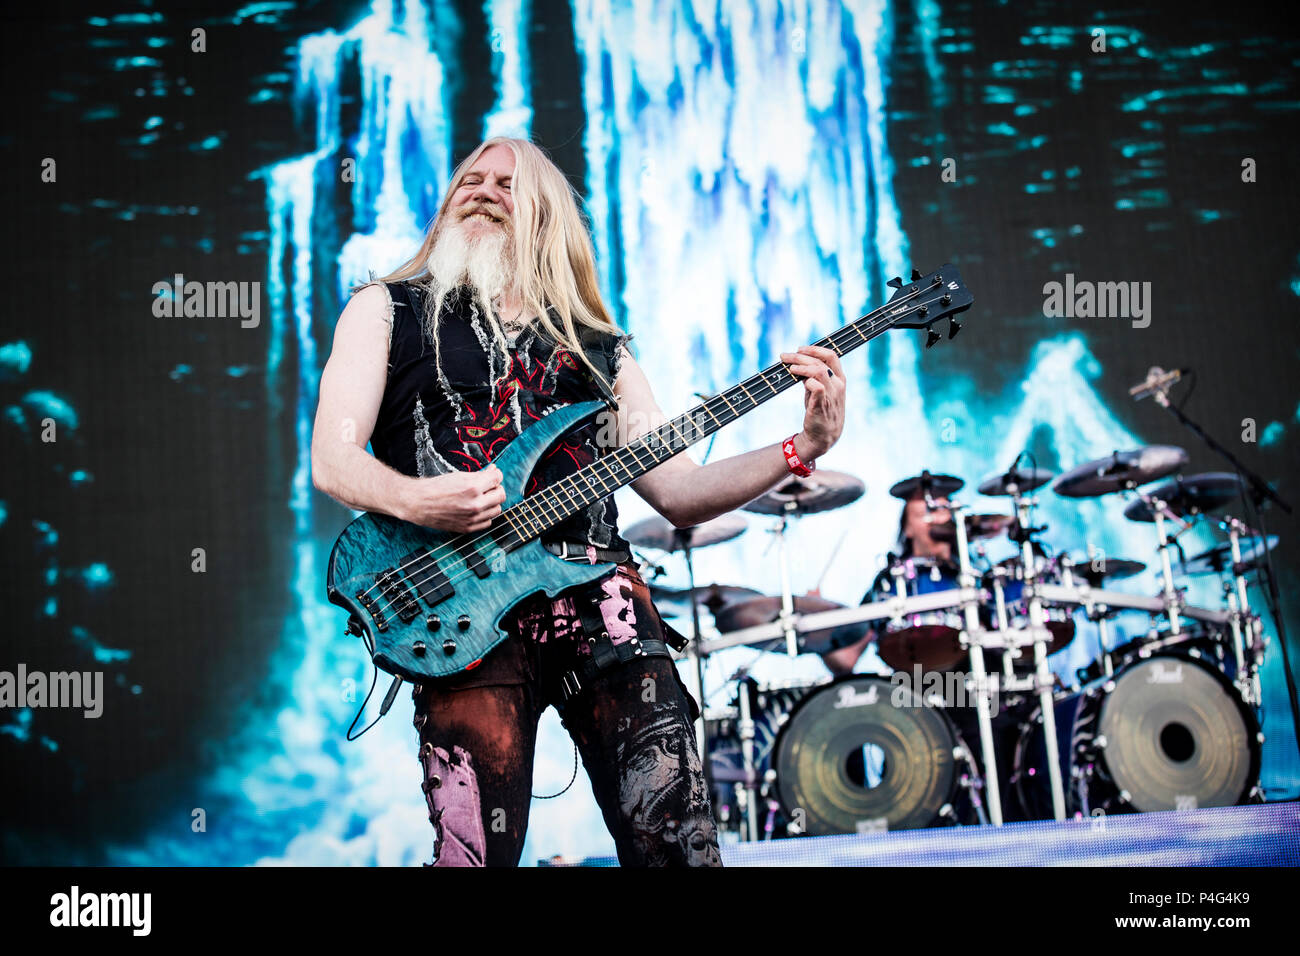 Denmark, Copenhagen - June 21, 2018. Nightwish, the Finnish symphonic metal band, performs a live concert during the Danish heavy metal festival Copenhell 2018 in Copenhagen. Here bass player Marco Hietala is seen live on stage. (Photo credit: Gonzales Photo - Christian Hjorth). Stock Photo